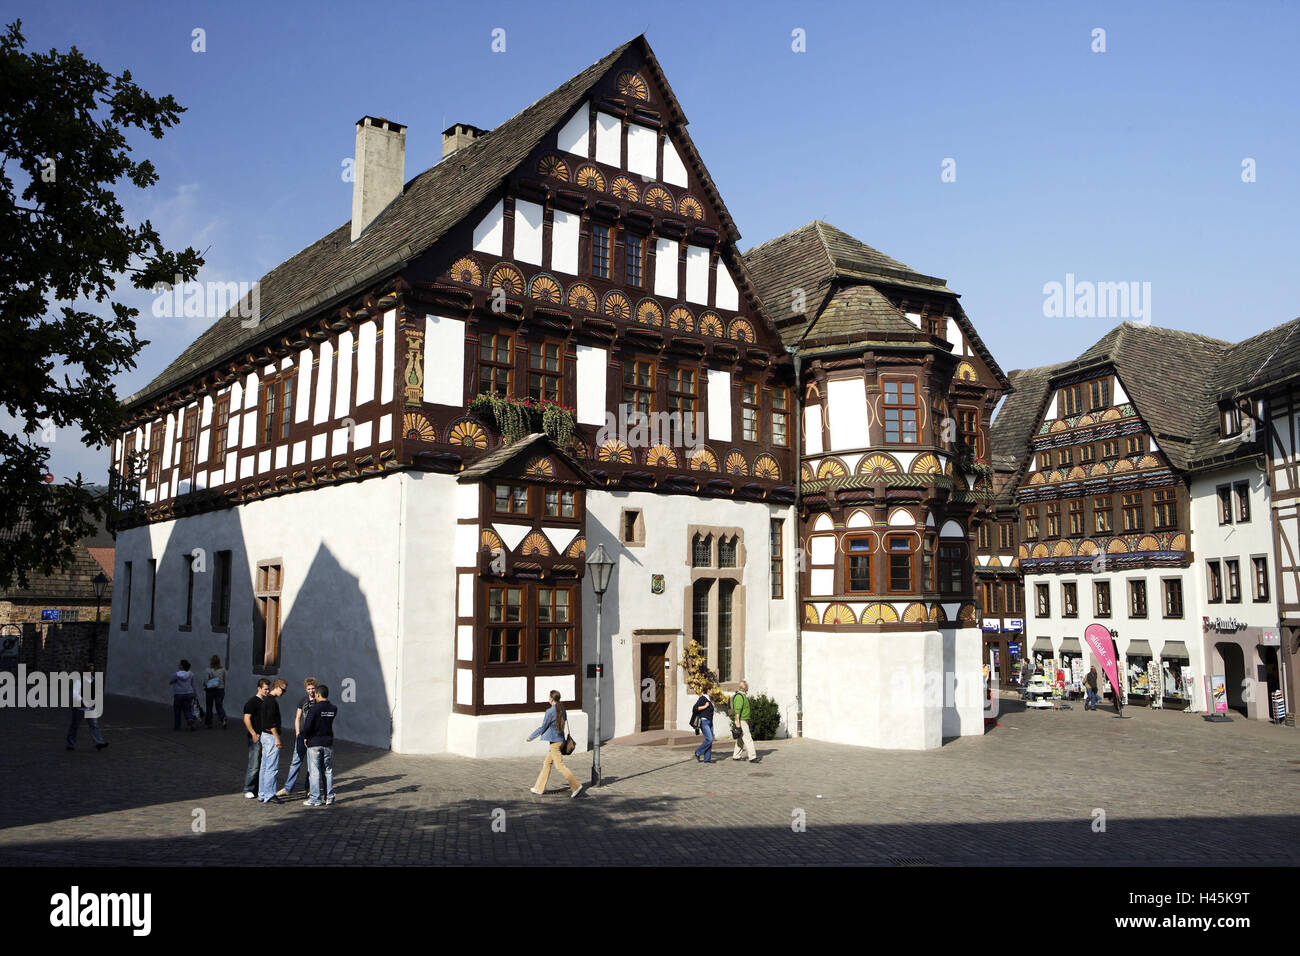 Germany, North Rhine-Westphalia, Höxter, marketplace, old Dechanei, tourists, Weser mountainous country, district town, Old Town, space, Dechanei, half-timbered house, house, half-timbered, structure, architectural style, Adel's seat, Weser Renaissance, houses, residential houses, architecture, typically, people, tourism, vacation, season, summer, sunshine, Stock Photo